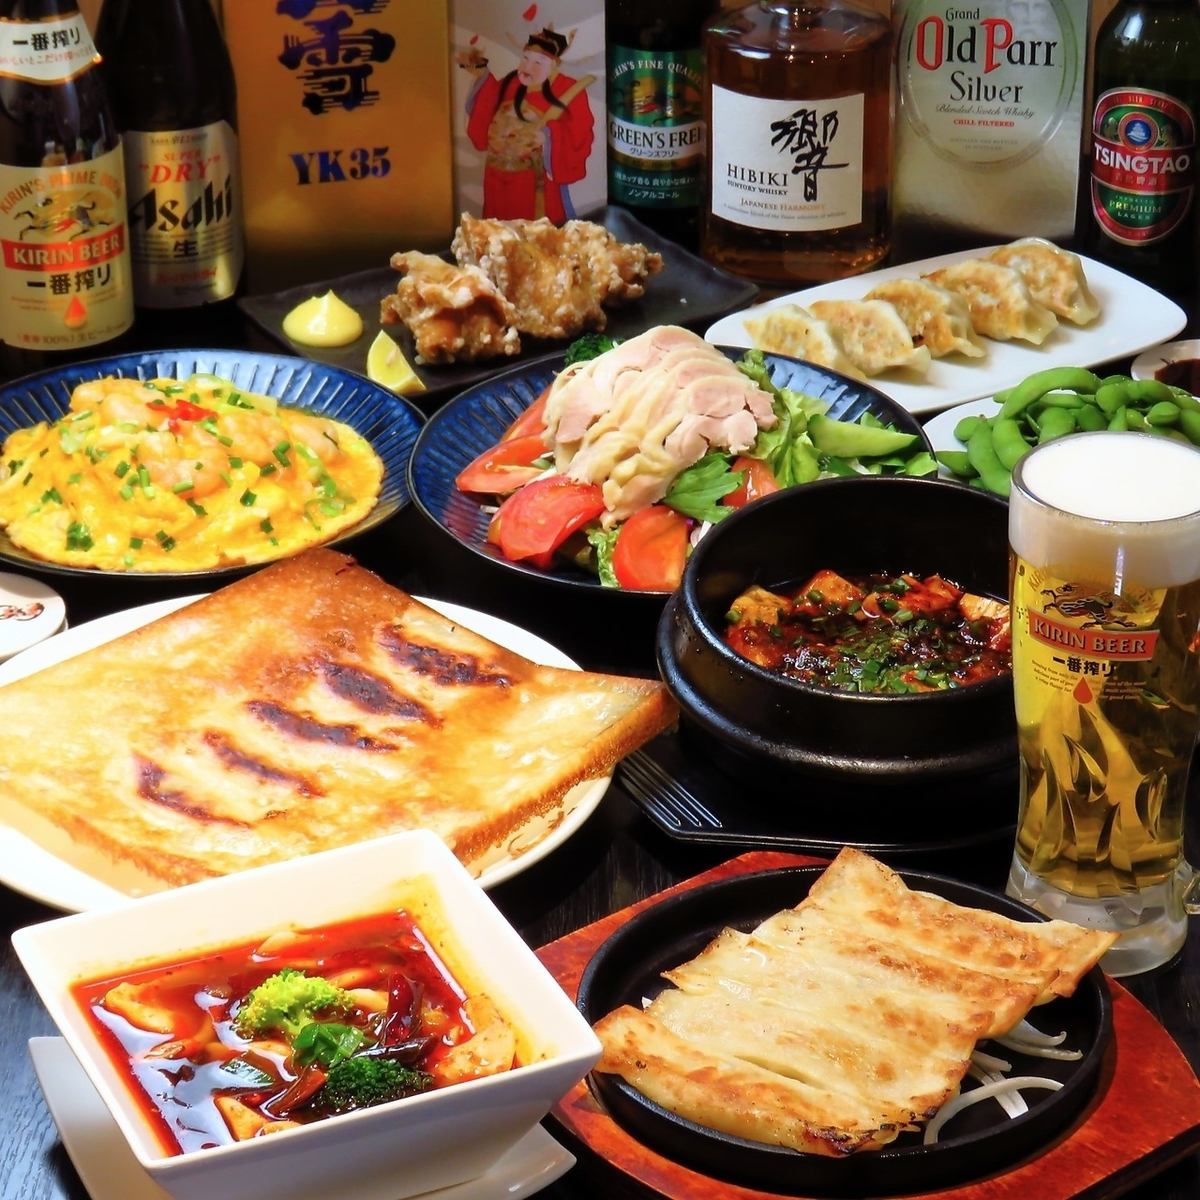 The all-you-can-eat Chinese food course includes 2.5 hours of all-you-can-drink for 3,580 yen (tax included)!